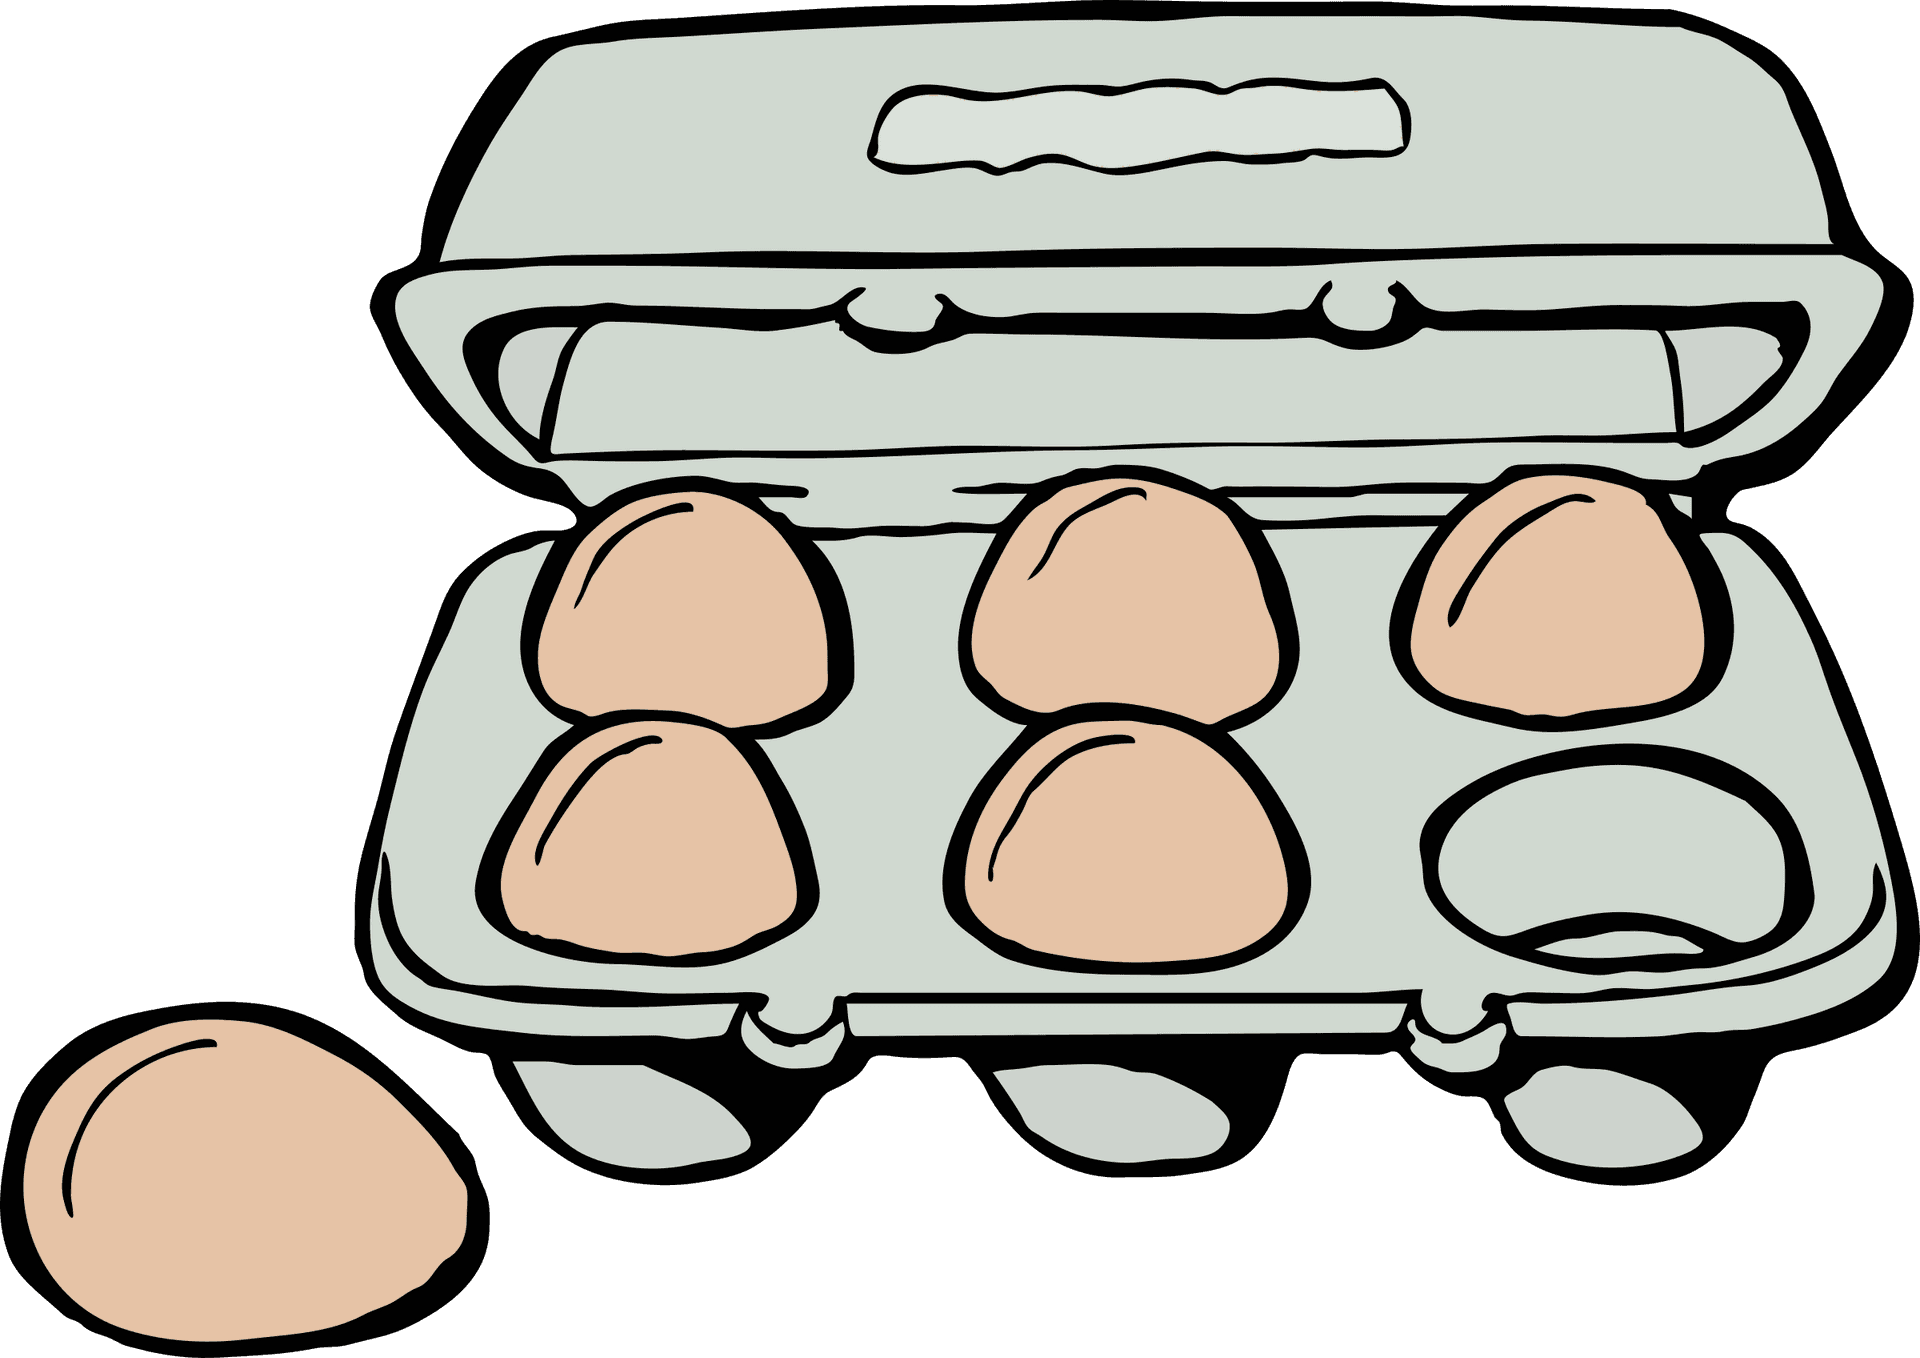 Open Egg Carton With One Egg Missing PNG